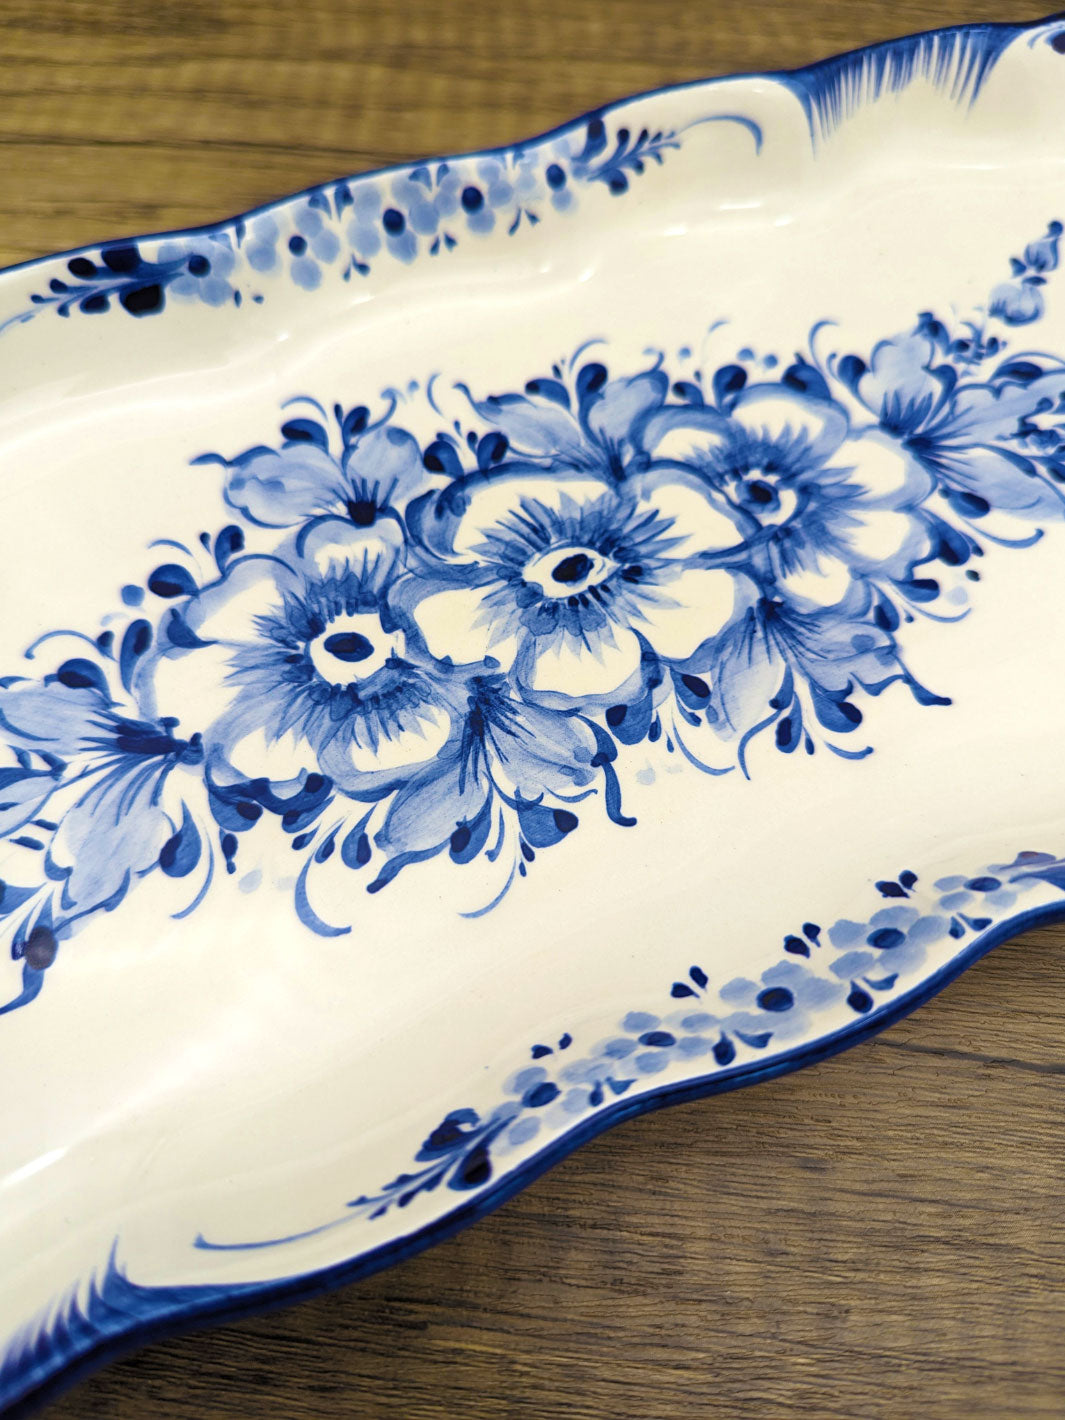 Hand Painted Blue and White Alcobaça Ceramic Serving Platter